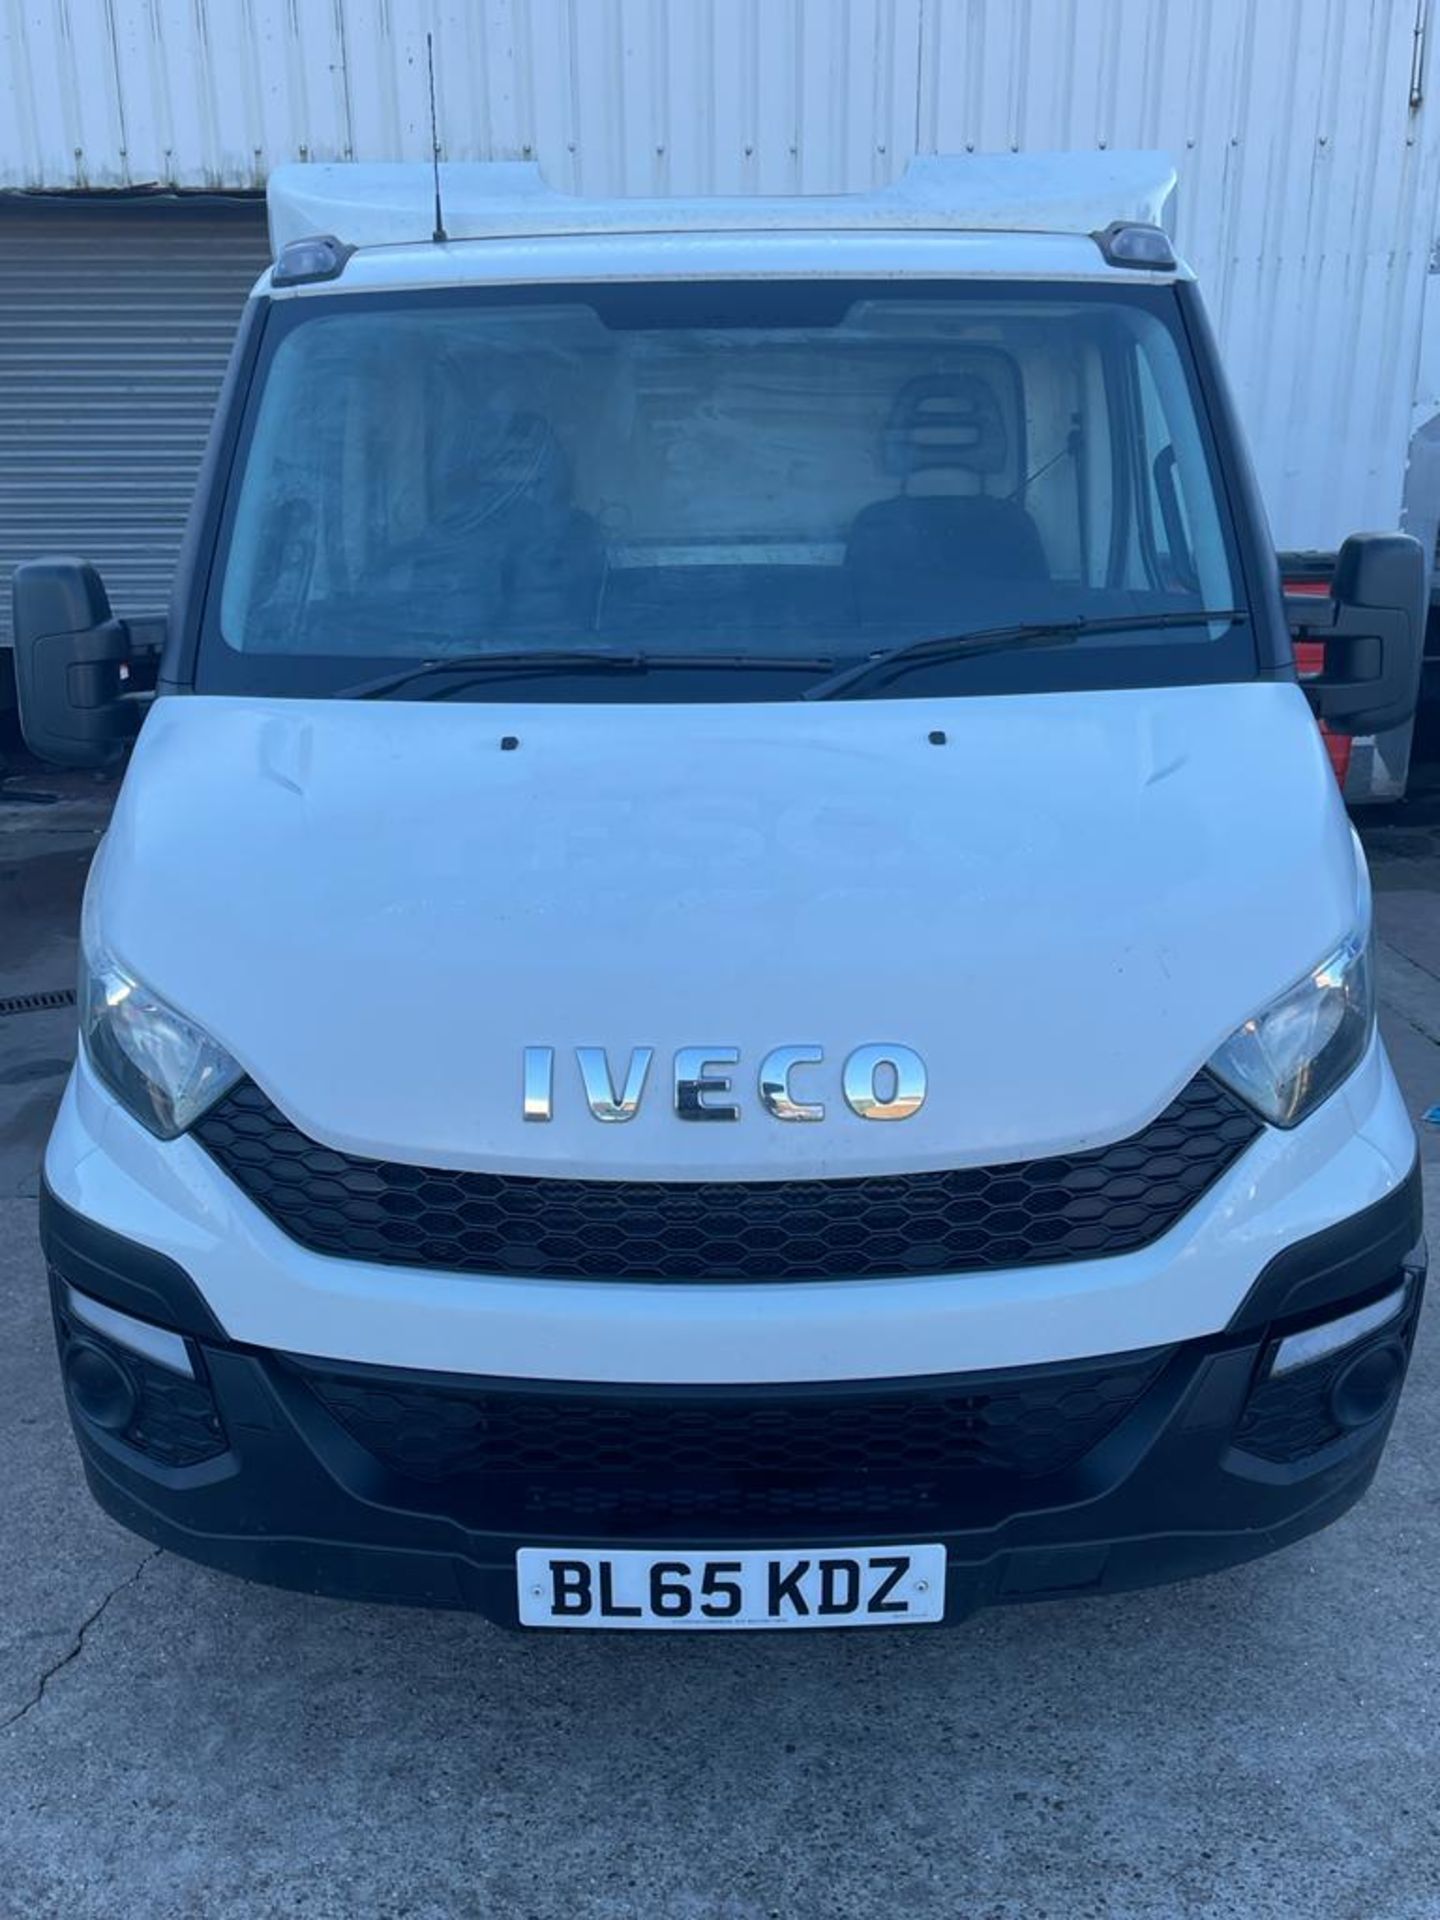 2015/65 IVECO DAILY 35S11, AUTO TIPTRONIC LWB TO TAKE 16ft RECOVERY BODY, TIDY CAB INTERIOR *NO VAT* - Image 2 of 25